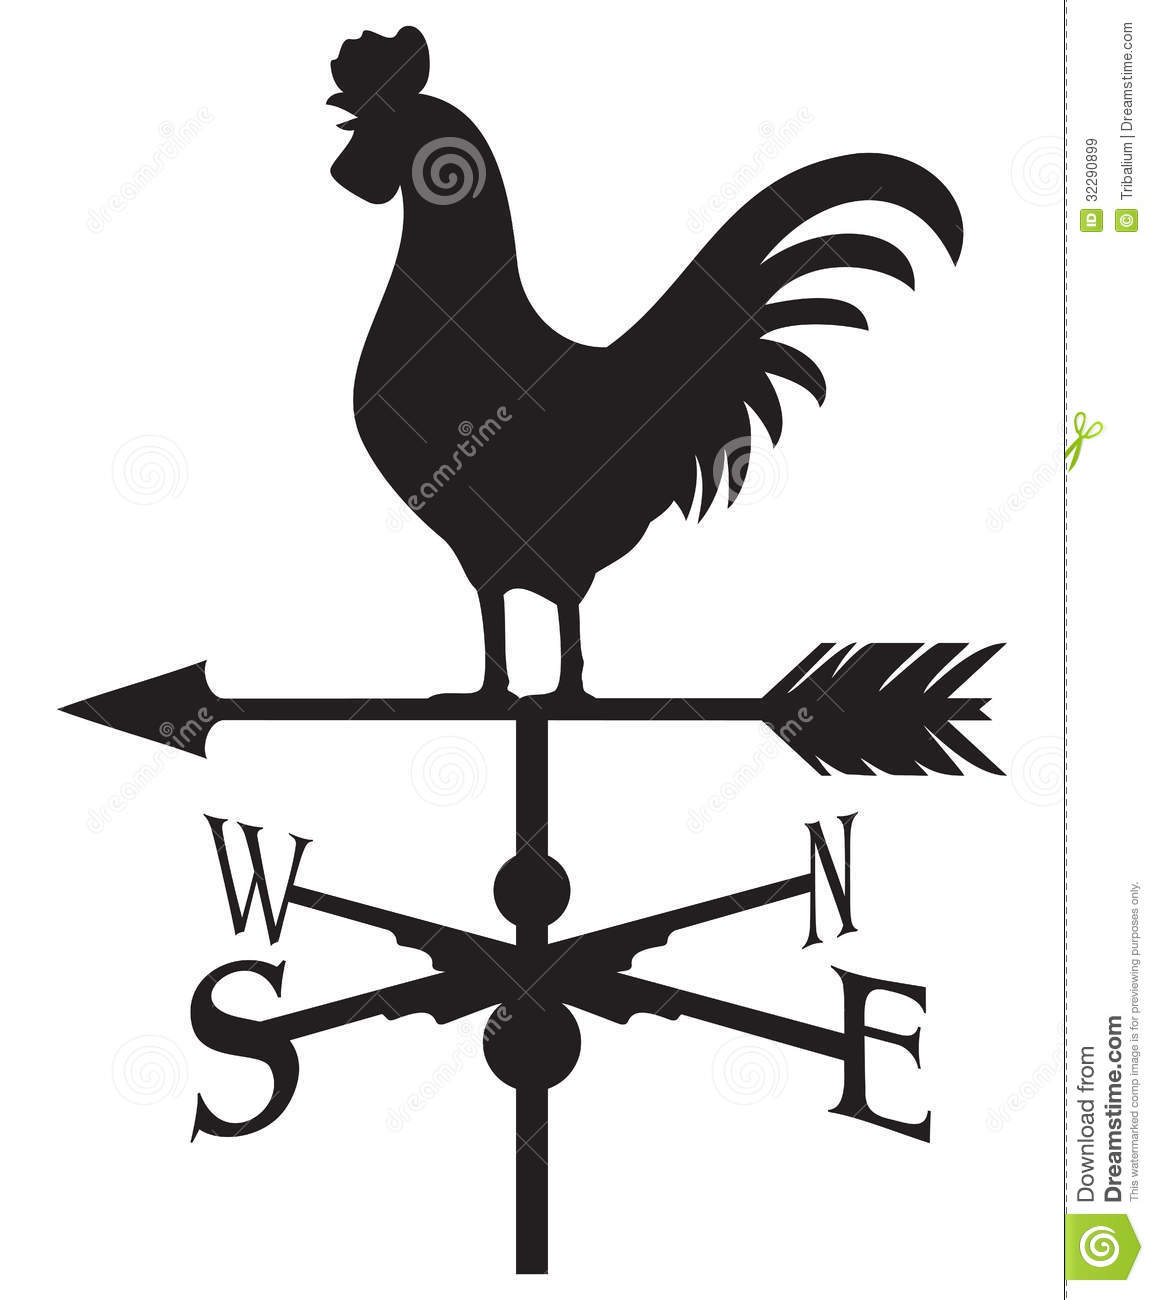 Rooster Weather Vane Royalty Free Stock Images   Image  32290899